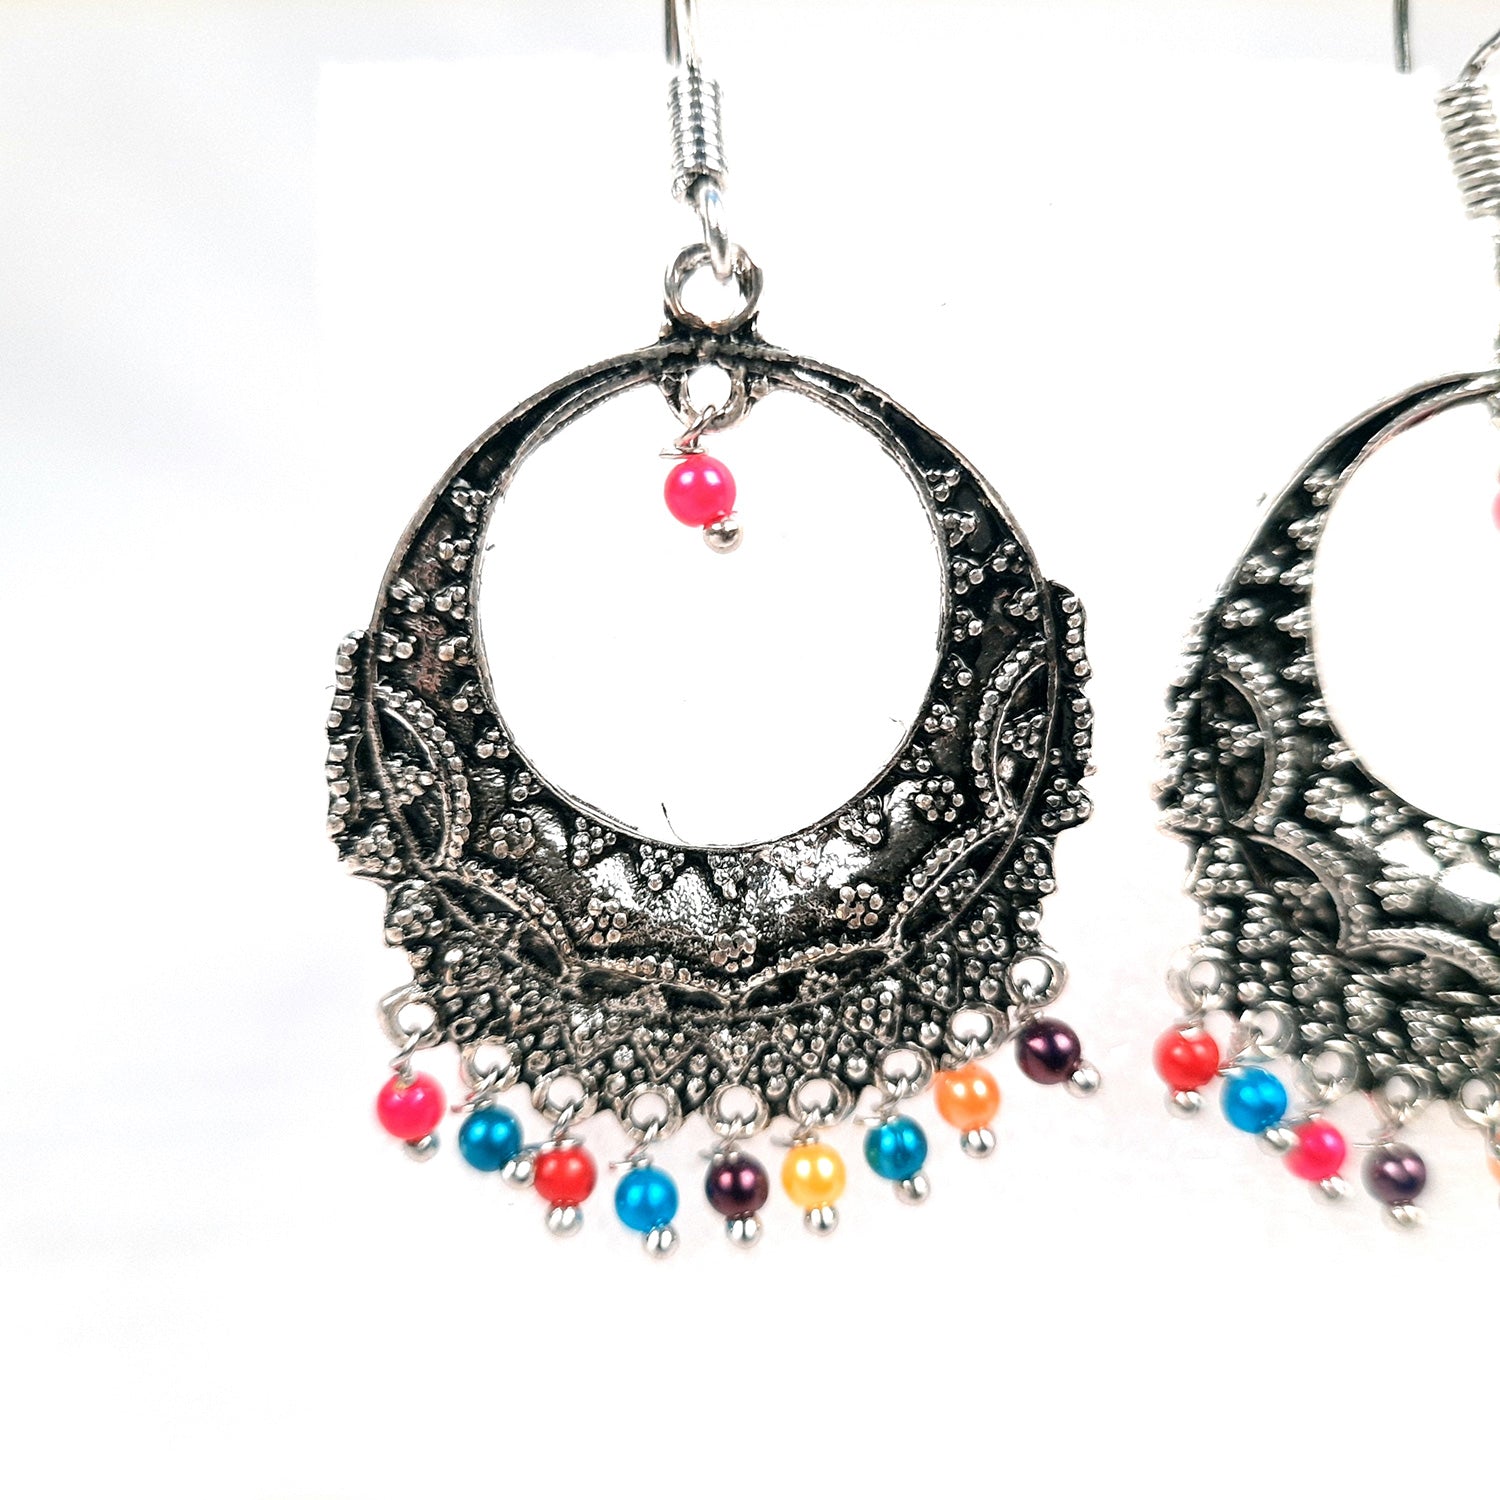 Earrings for Girls and Women - Chand Bali / Danglers | Latest Stylish Fashion Jewellery | Gift for Her - Apkamart